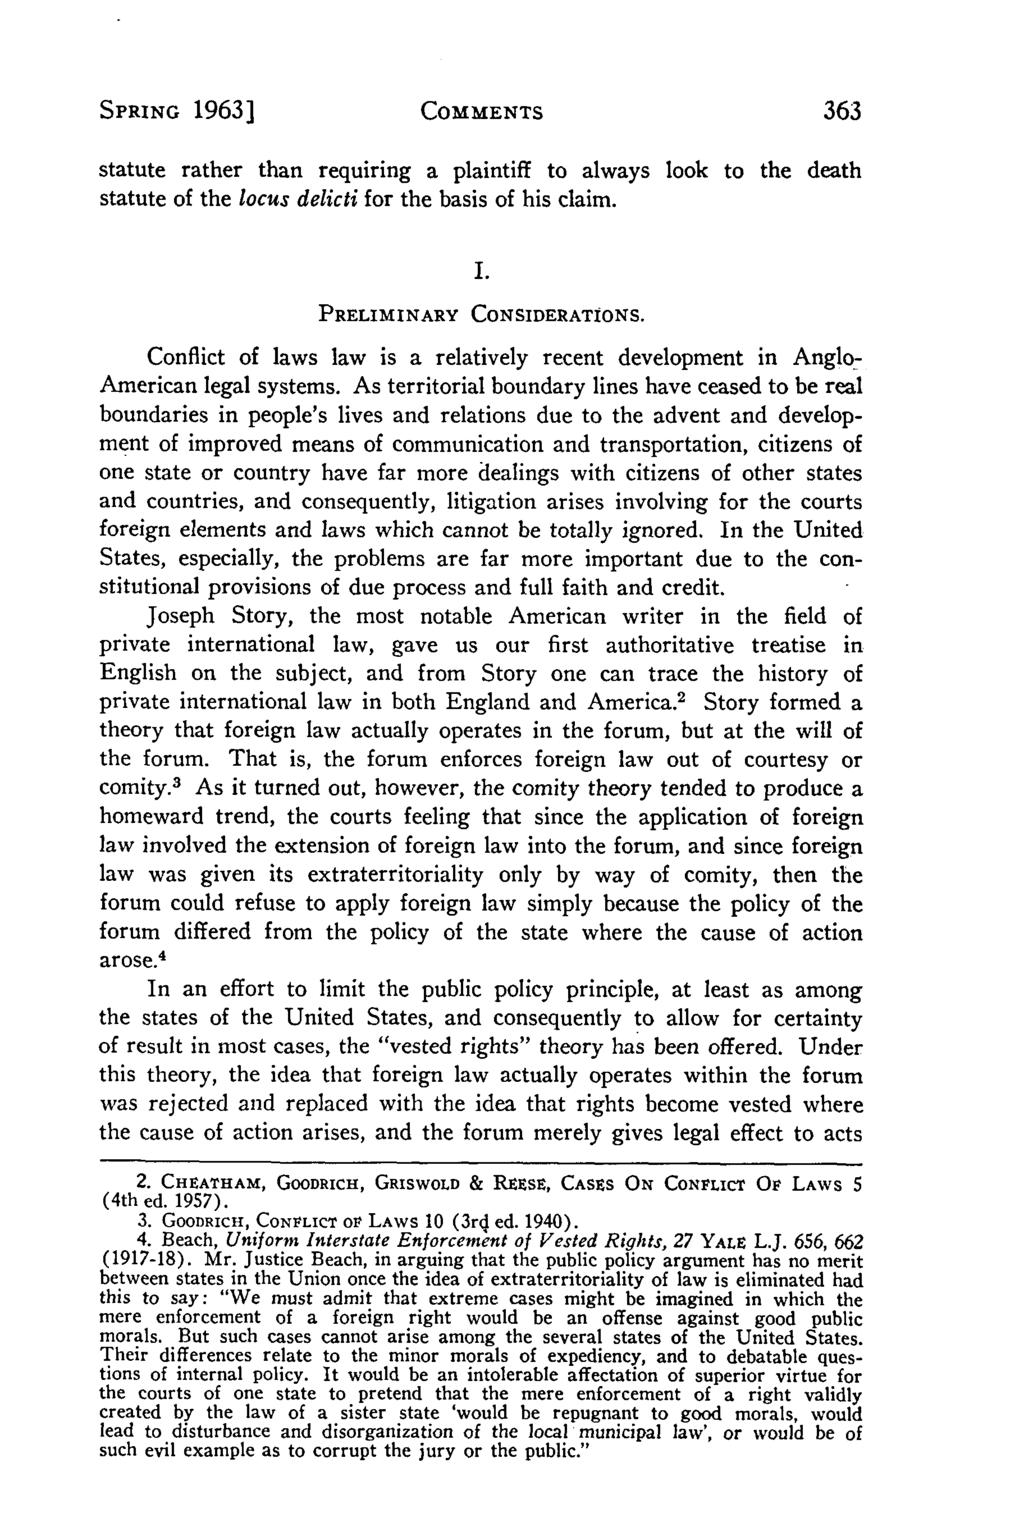 Villanova Law Review, Vol. 8, Iss. 3 [1963], Art. 3 SPRING 1963] COMMENTS statute rather than requiring a plaintiff to always look to the death statute of the locus delicti for the basis of his claim.